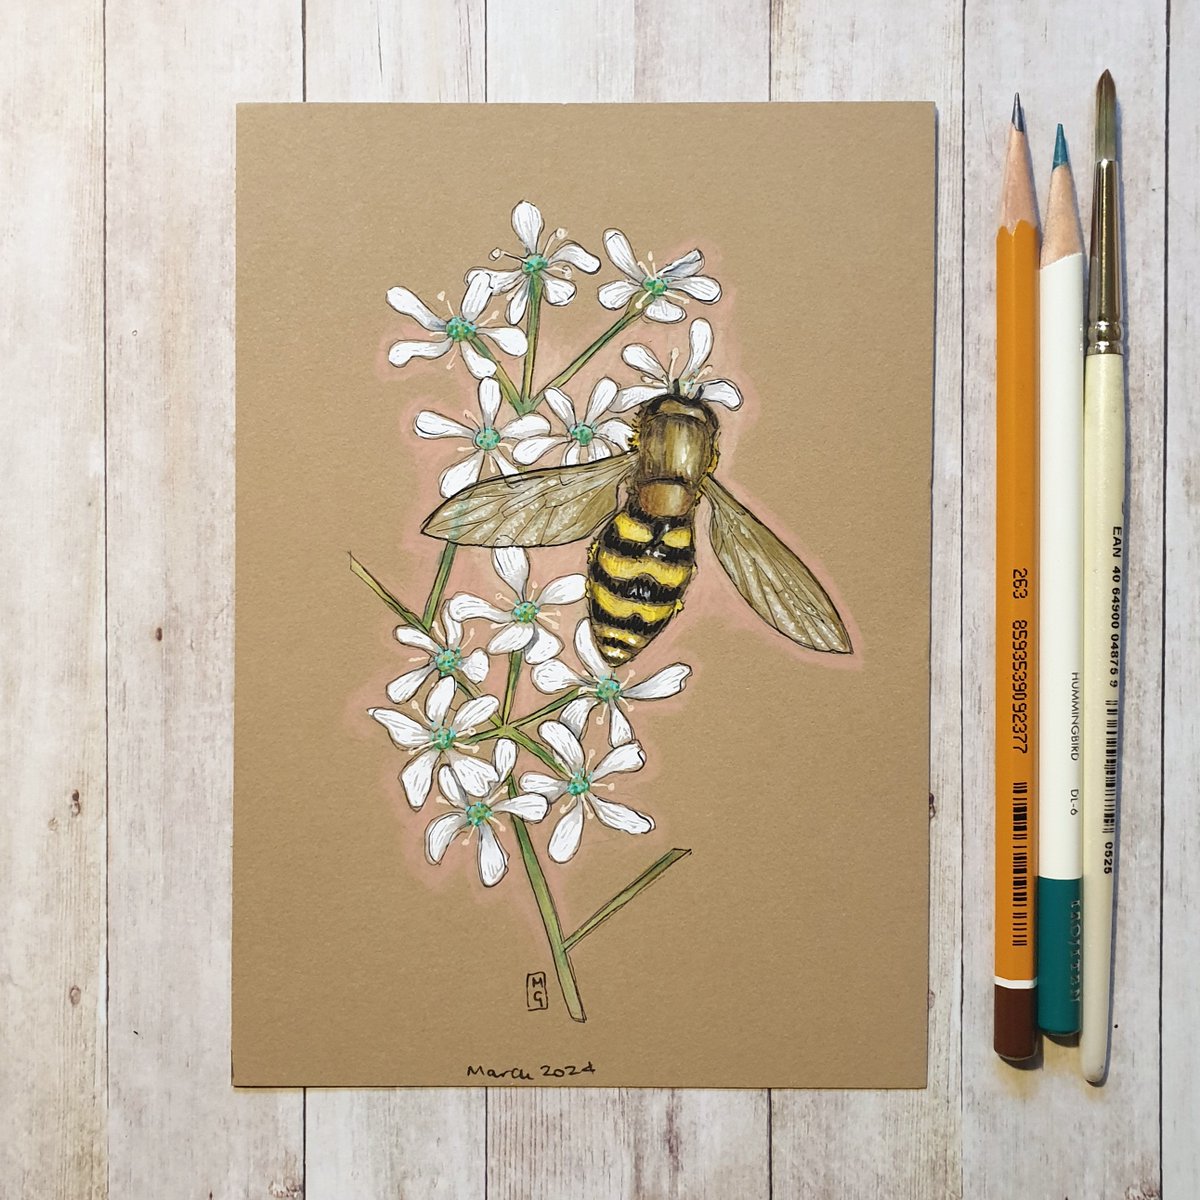 Hoverflies, as their name suggests, they are often seen hovering at flowers; the adults of many species feed mainly on nectar and pollen.
theweeowlart.etsy.com/listing/169416…
#Hoverfly #insect #InsectArt #OriginalArt #drawing #MixedMedia #artwork #TraditionalArt #Flowers #Flower